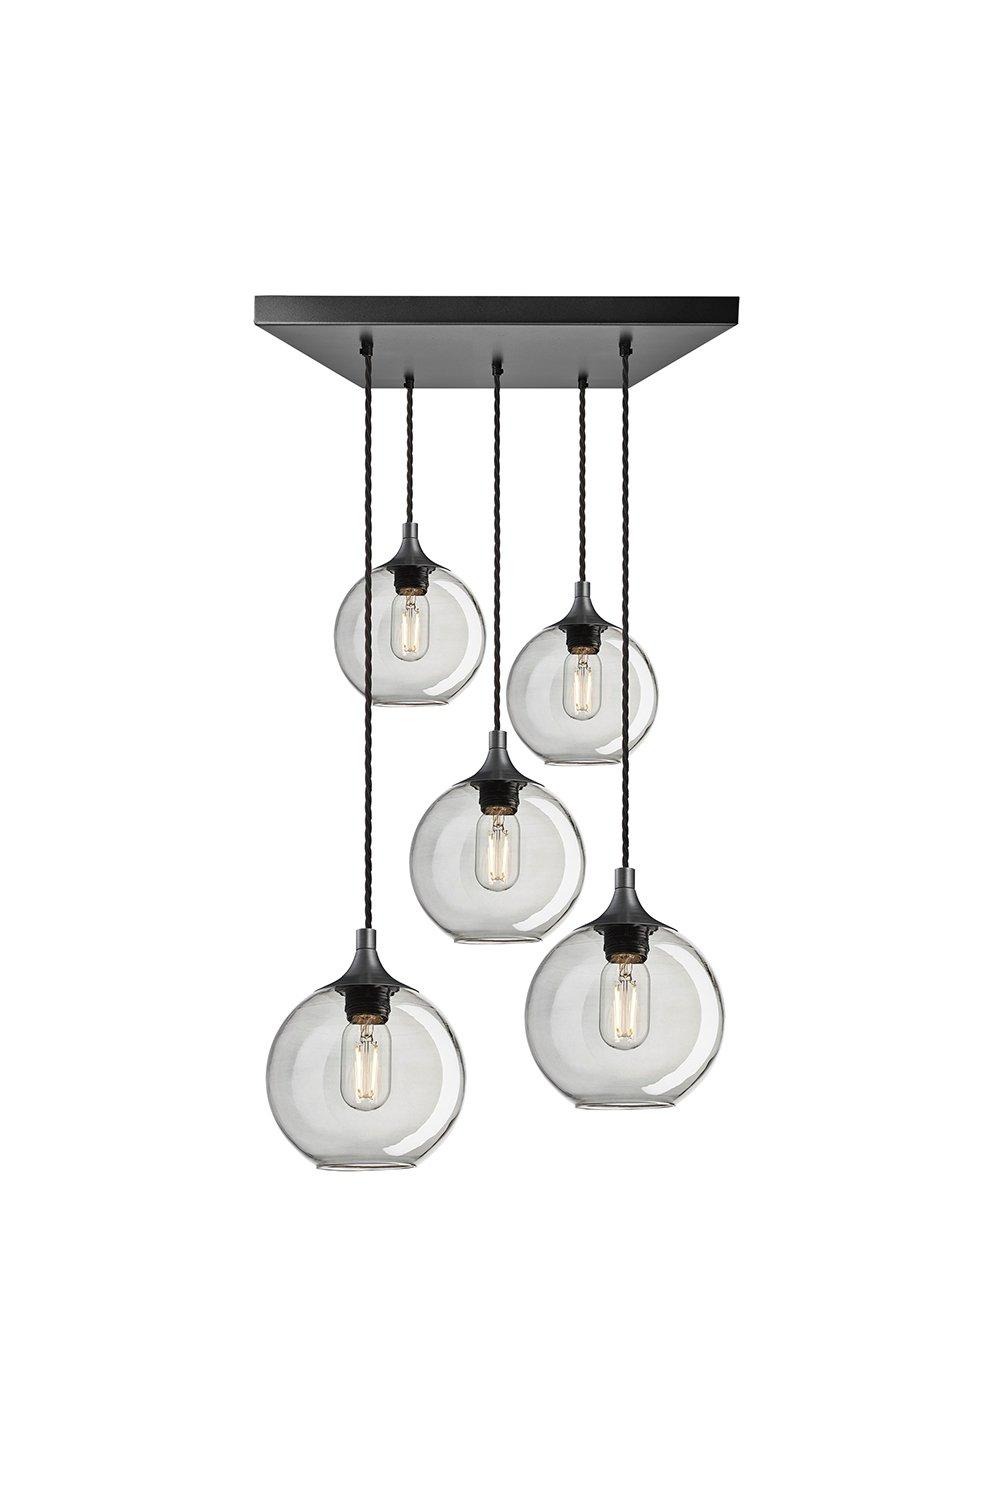 Chelsea Tinted Glass Globe 5 Wire Square Cluster Lights, 7 inch, Smoke Grey, Pewter holder